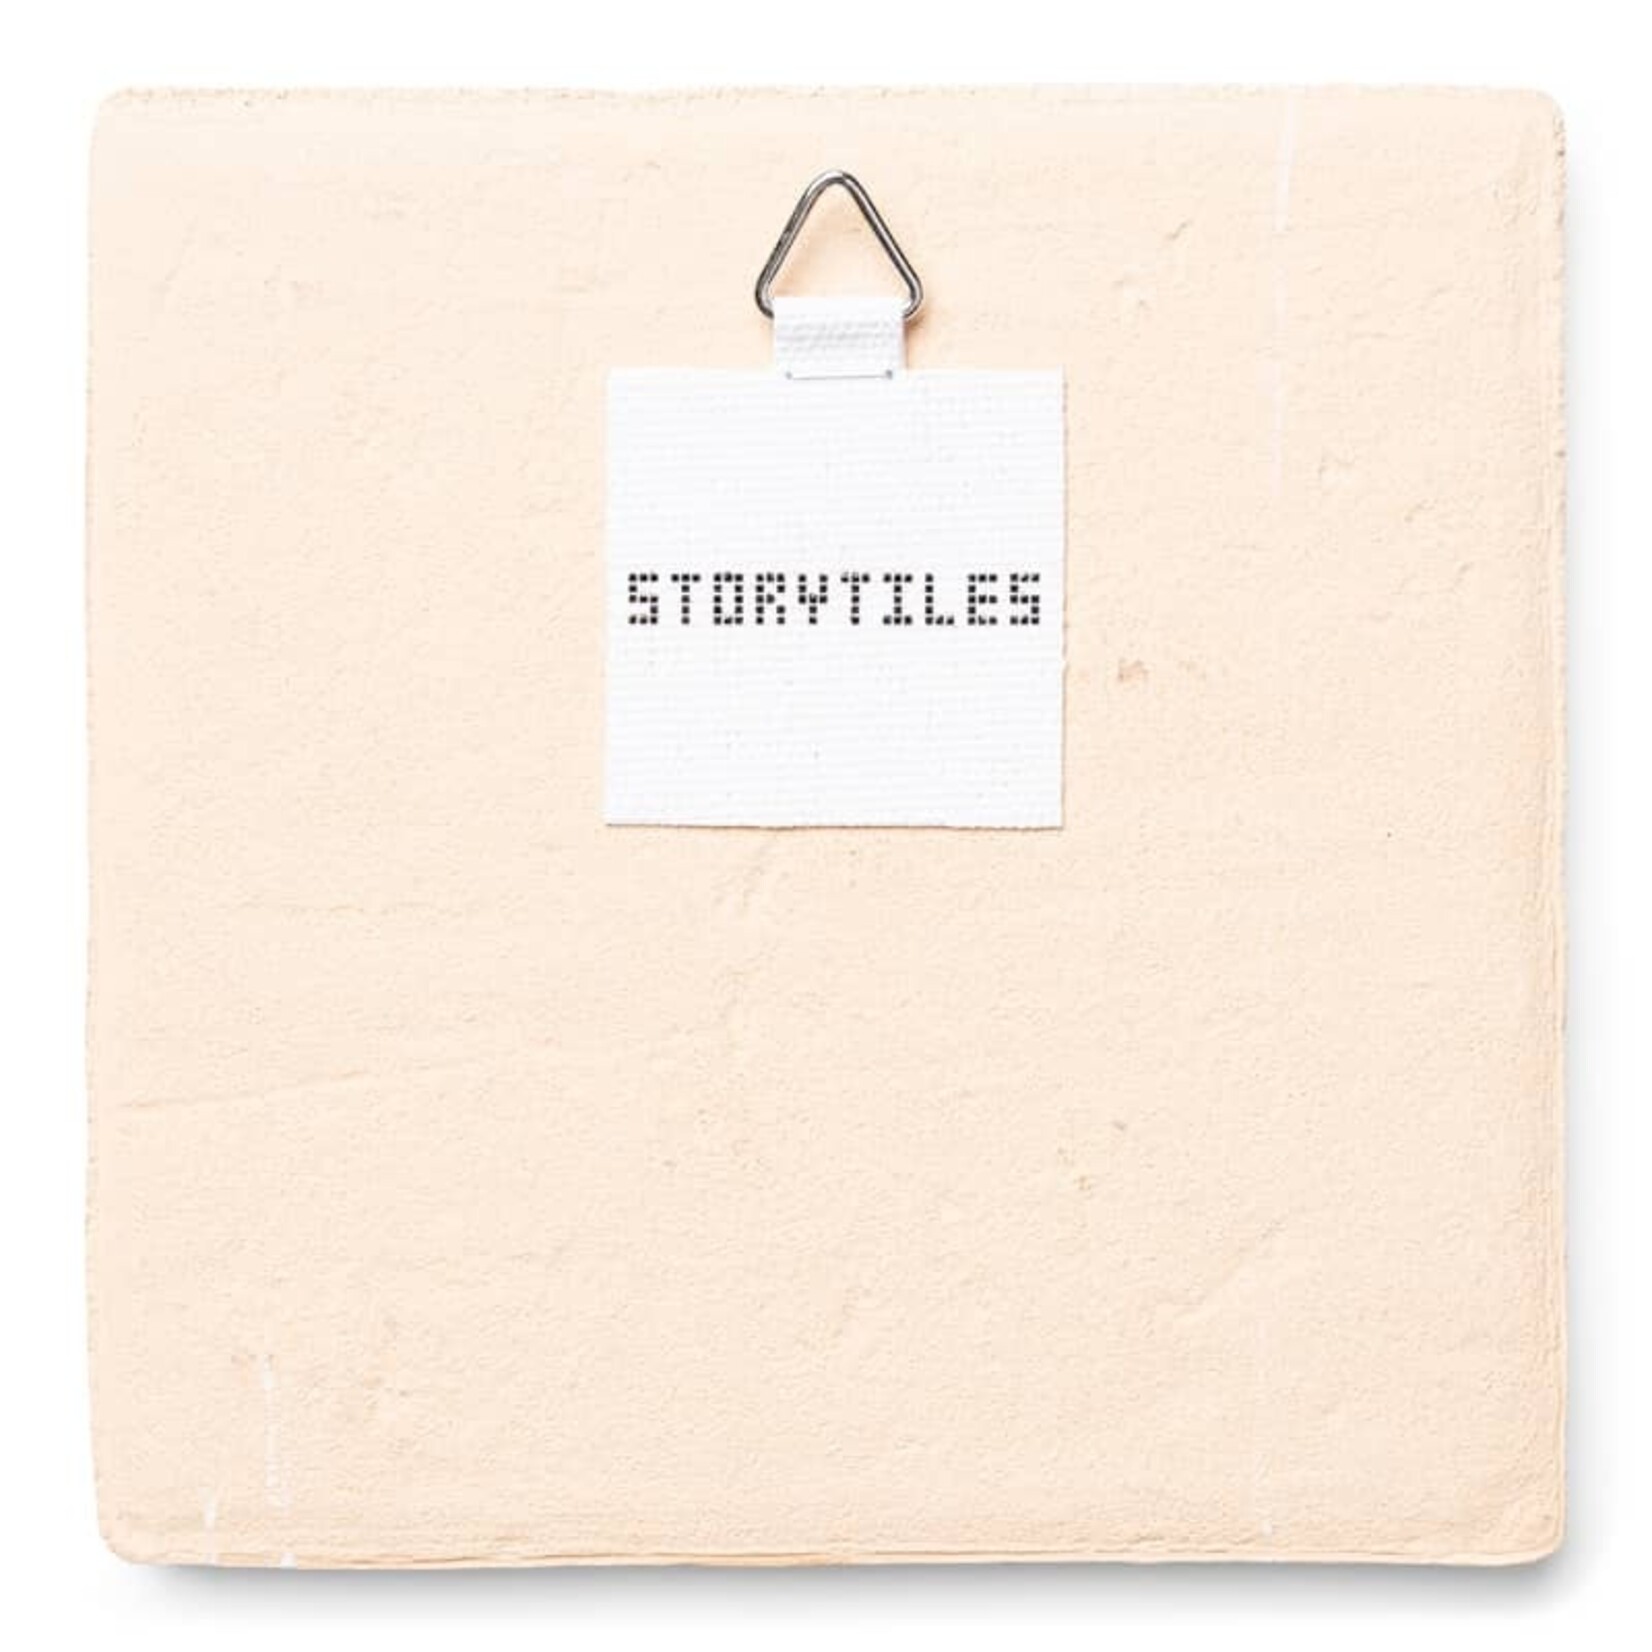 Storytiles Storytiles - Oost west thuis best